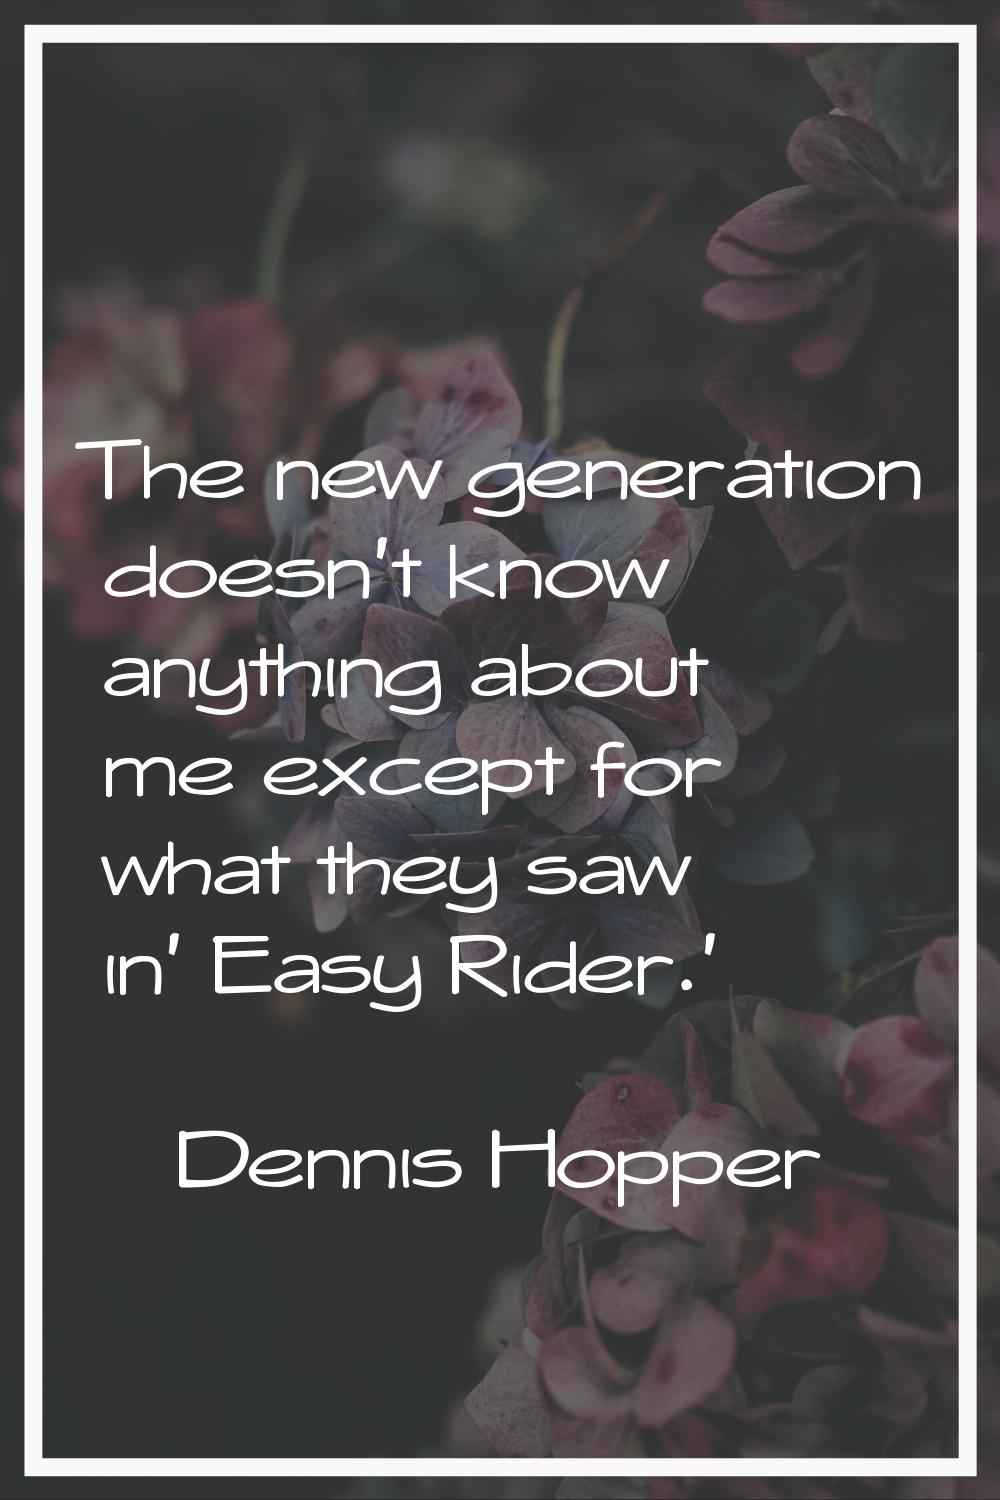 The new generation doesn't know anything about me except for what they saw in' Easy Rider.'